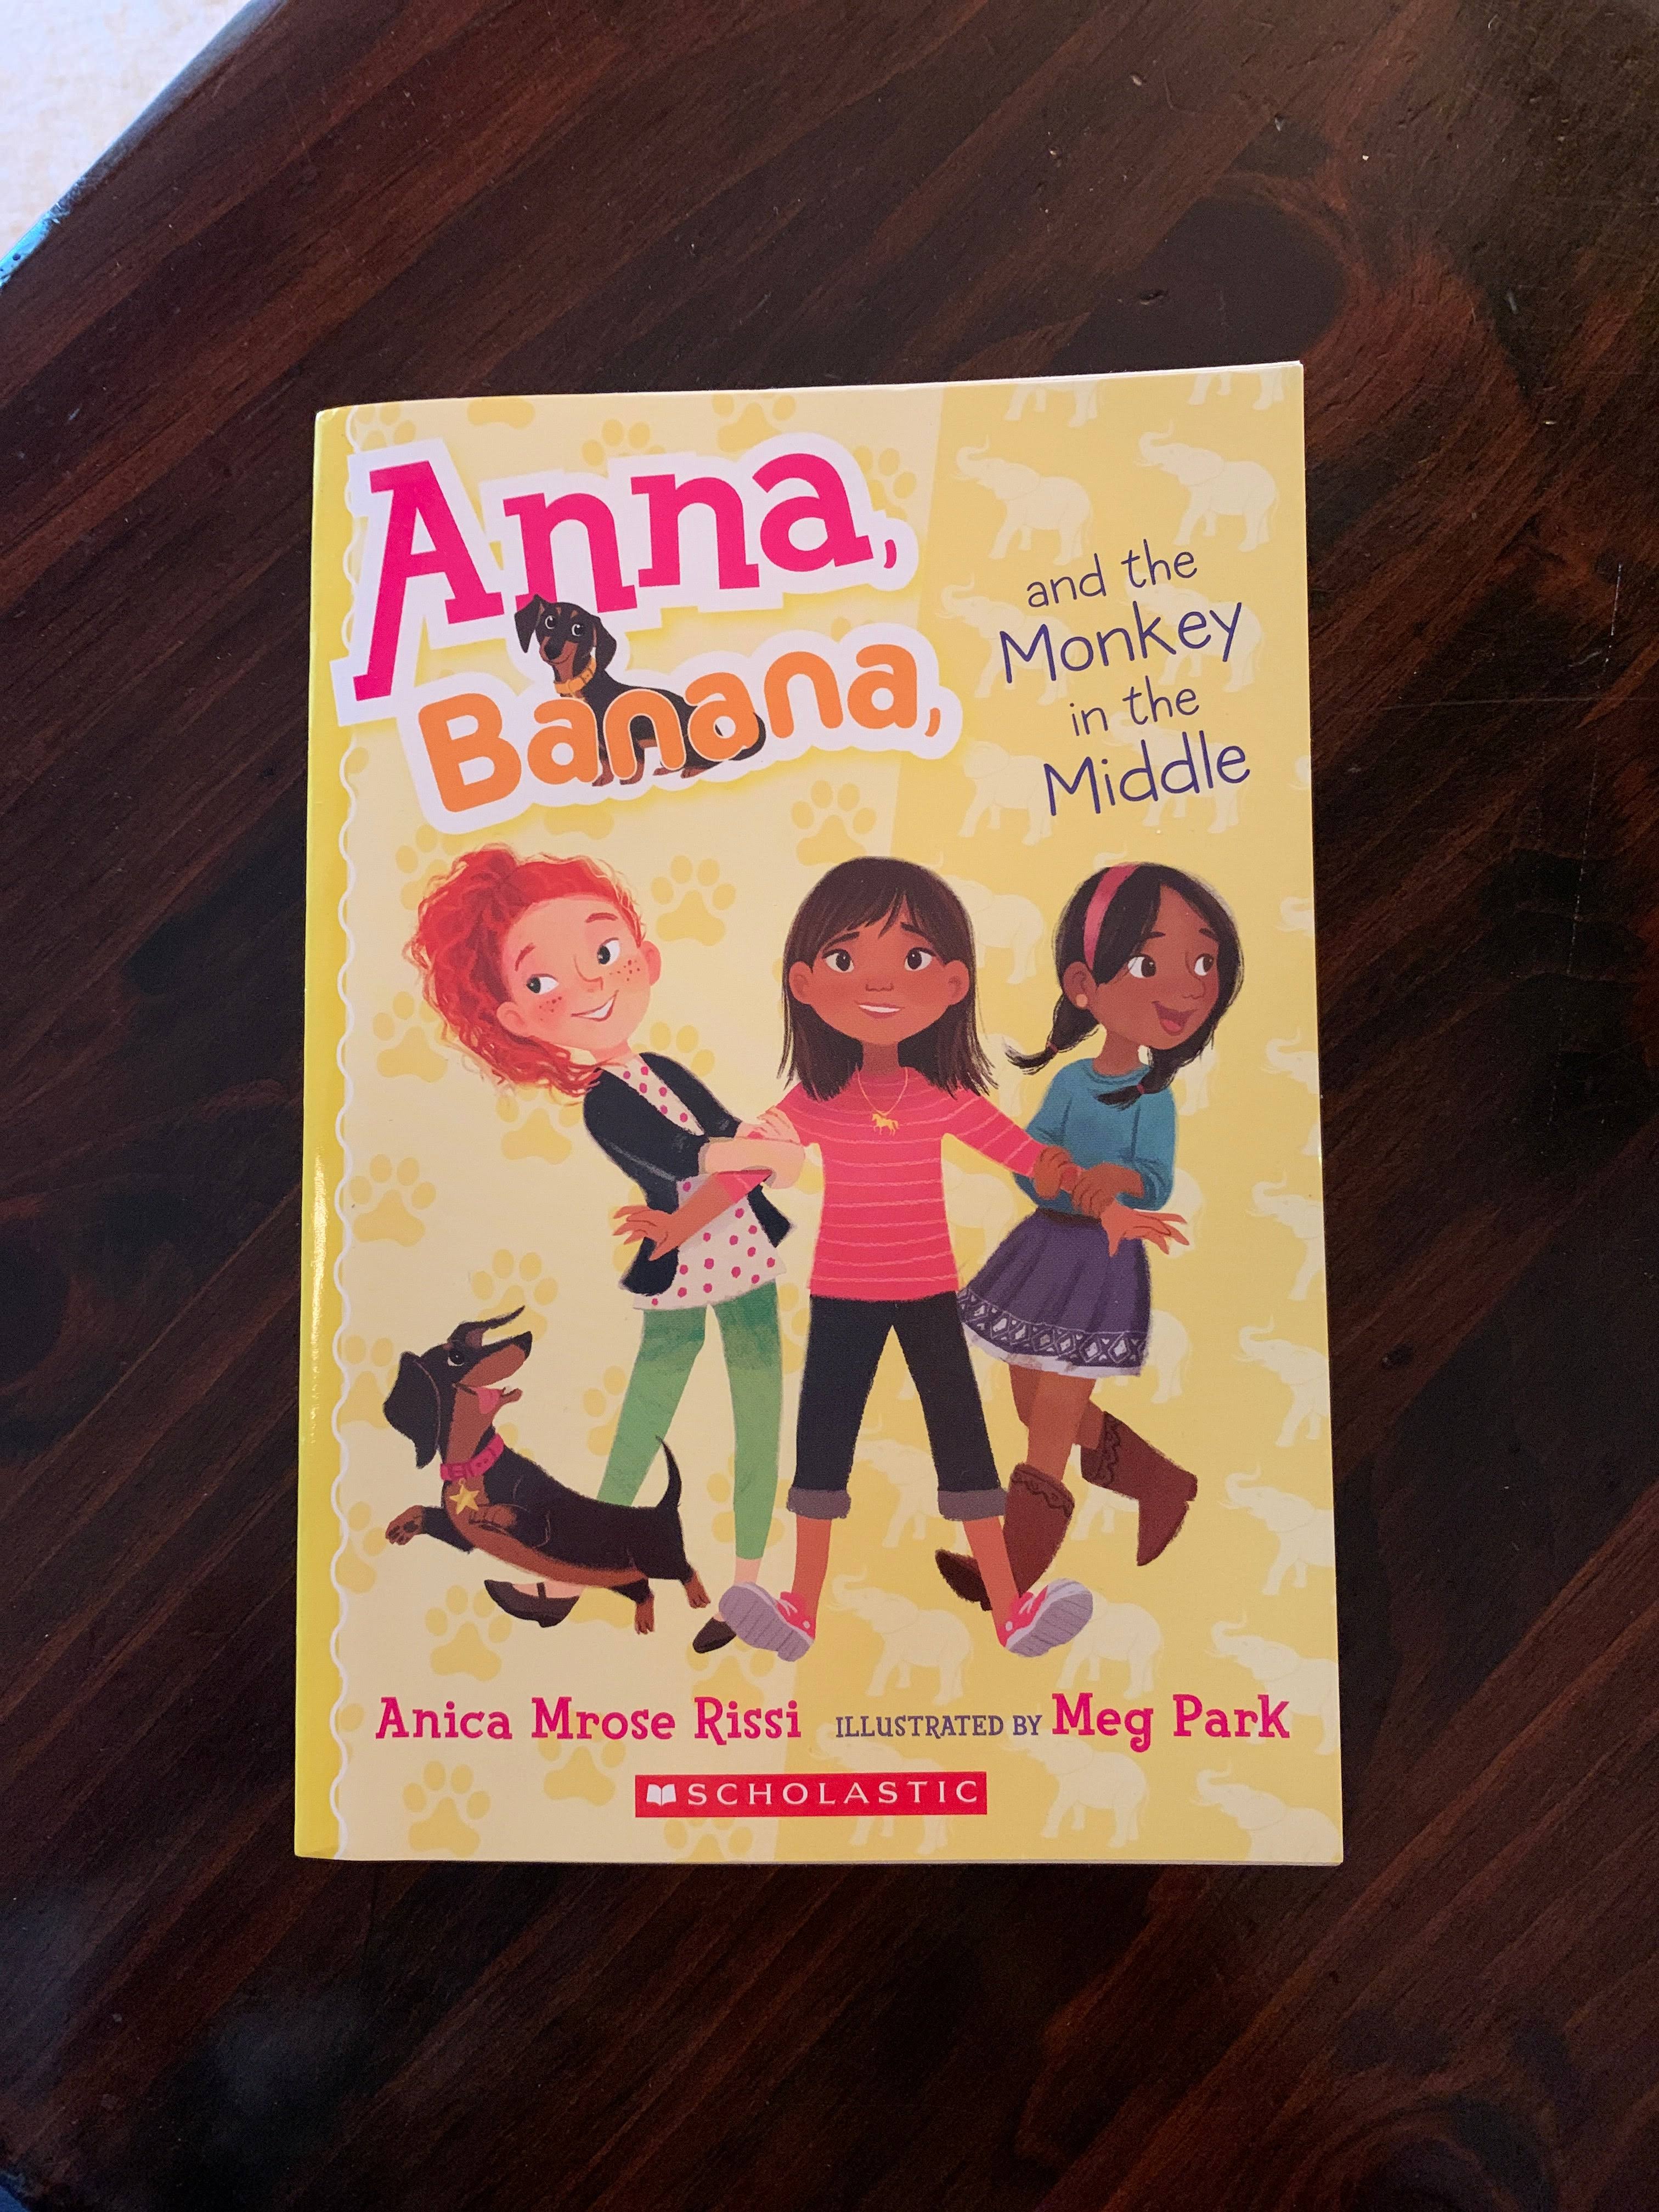 Anna, Banana, and the Monkey in the Middle by Anica Mrose Rissi - 0545888603 by Scholstic | Thriftbooks.com